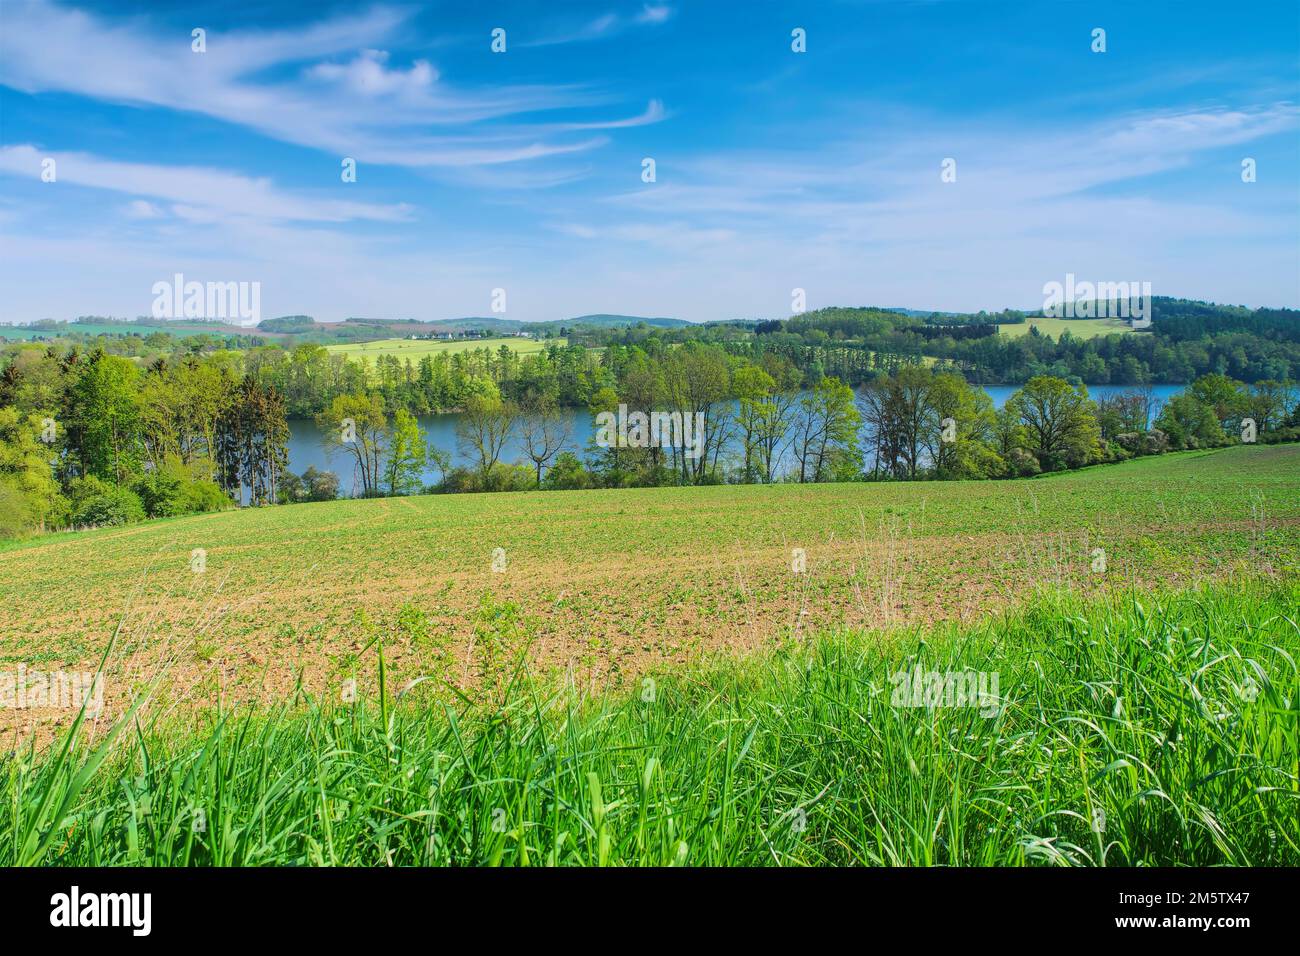 the lake Pirk in Vogtland with field in spring, Germany Stock Photo